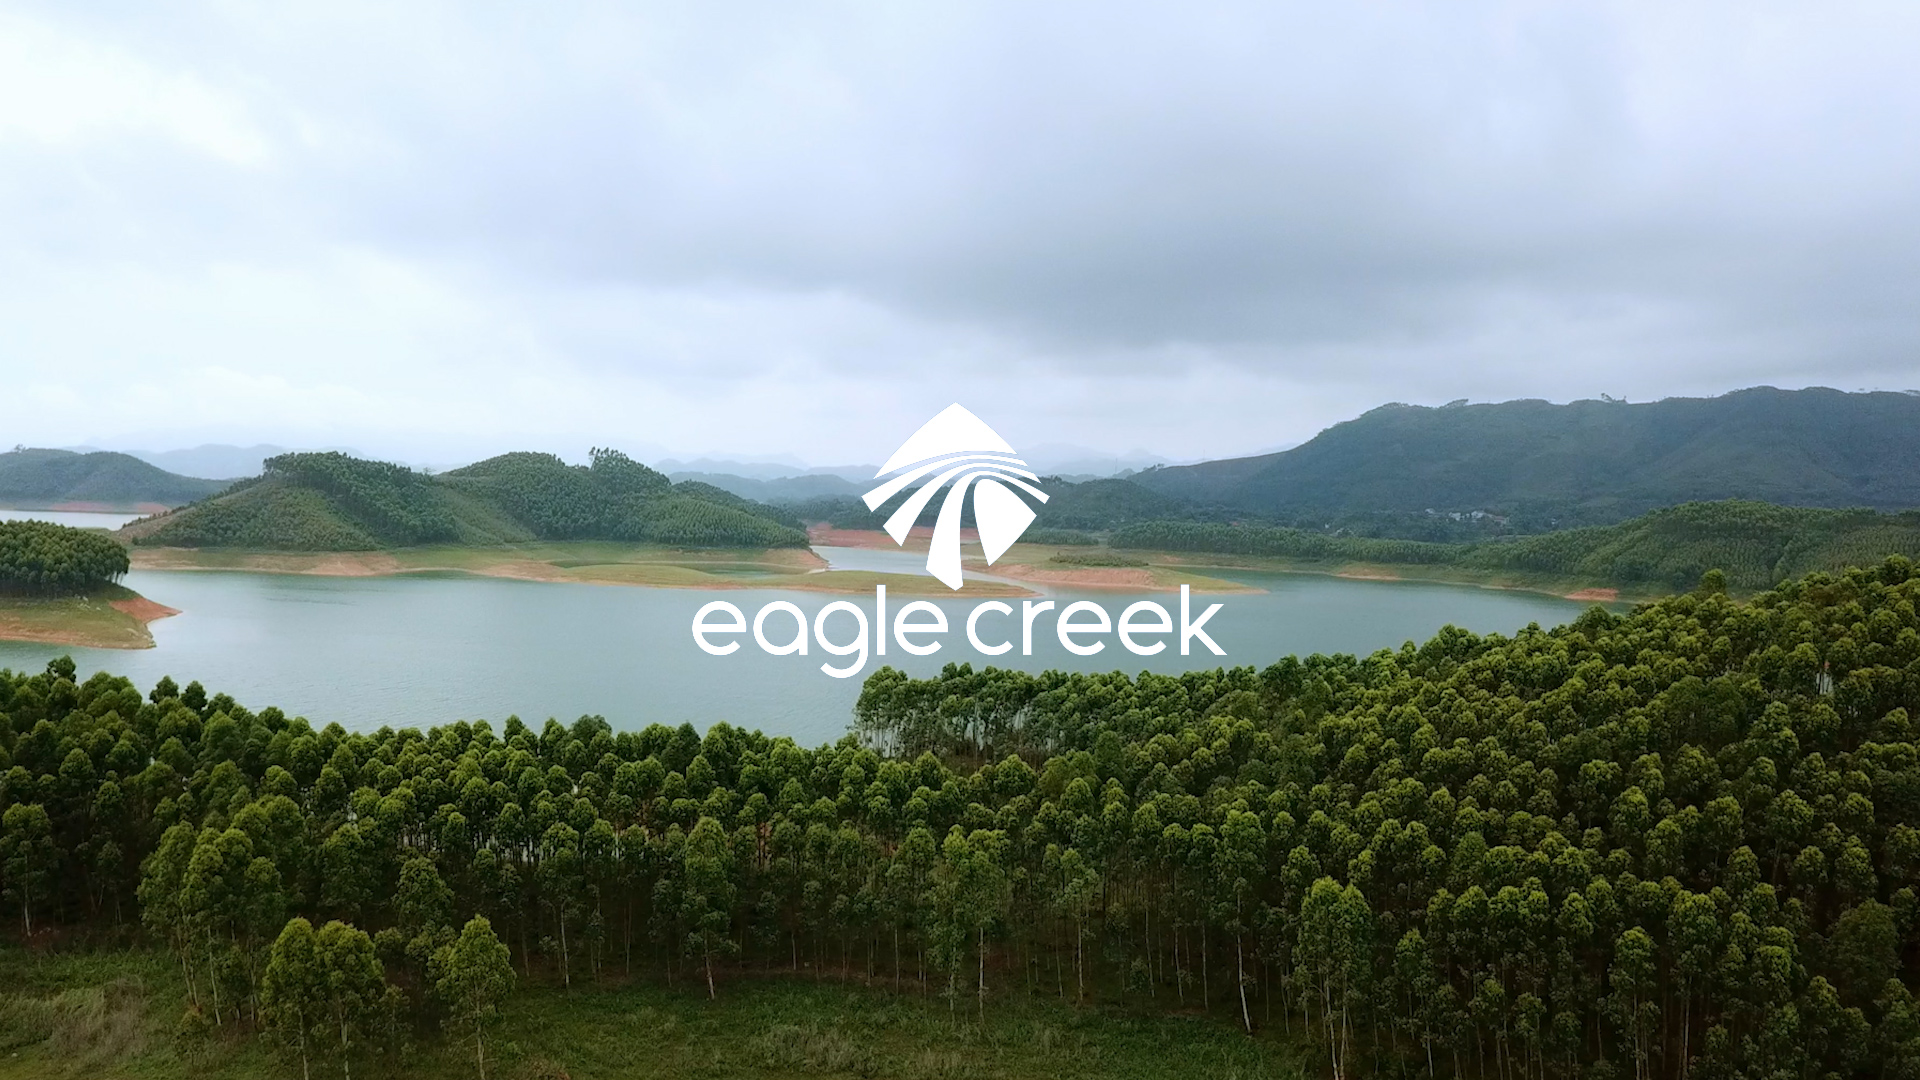 Eagle Creek logo on top of image of a green forest and river.